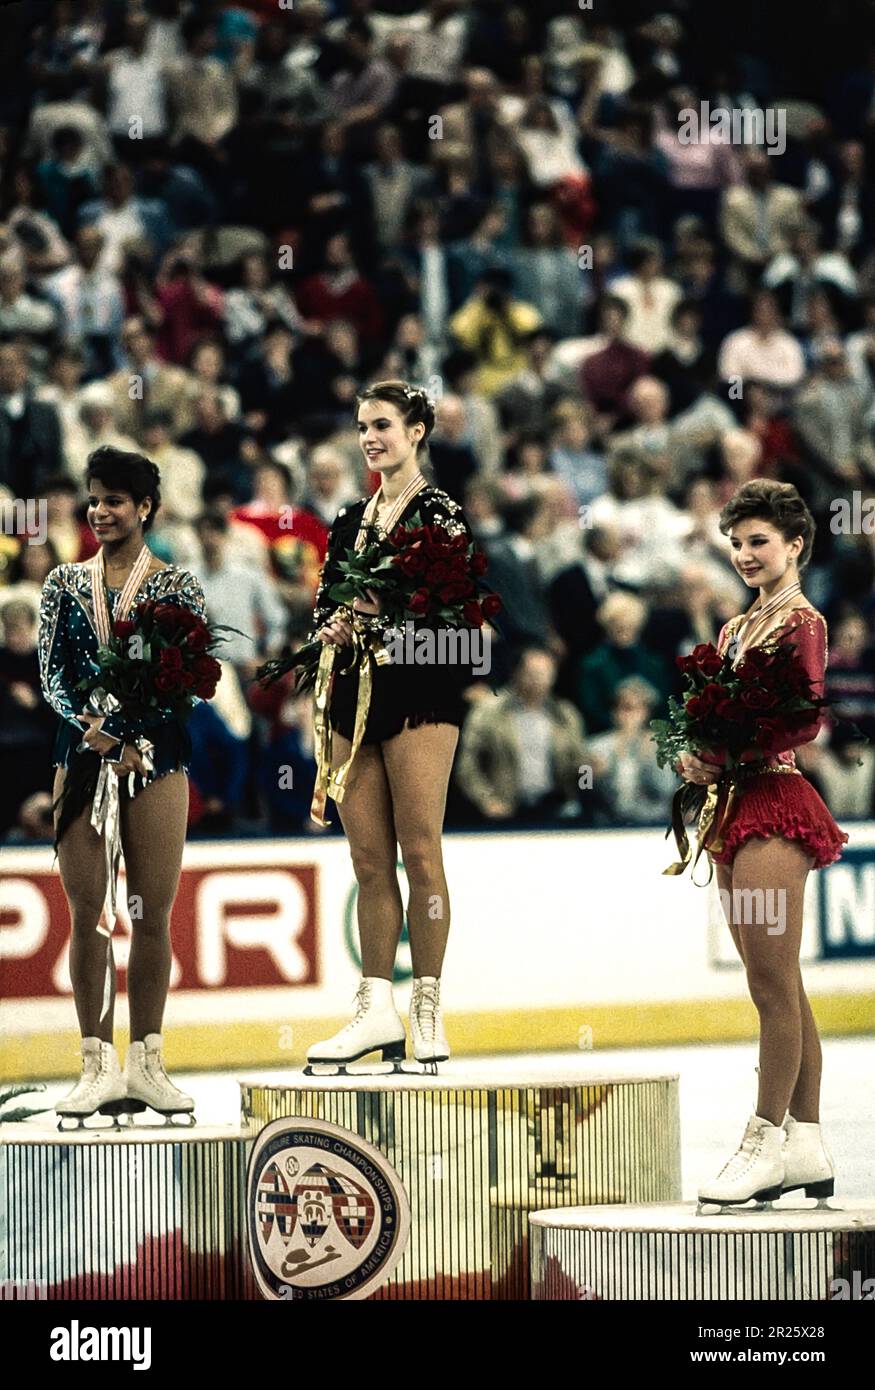 Katerina Witt (GDR) -C- wins the gold medal, with Debi Thomas (USA) -L- silver, and  Caryn Kadavy (USA) -R-bronze at the 1987 World Figure Skating Championships. Stock Photo